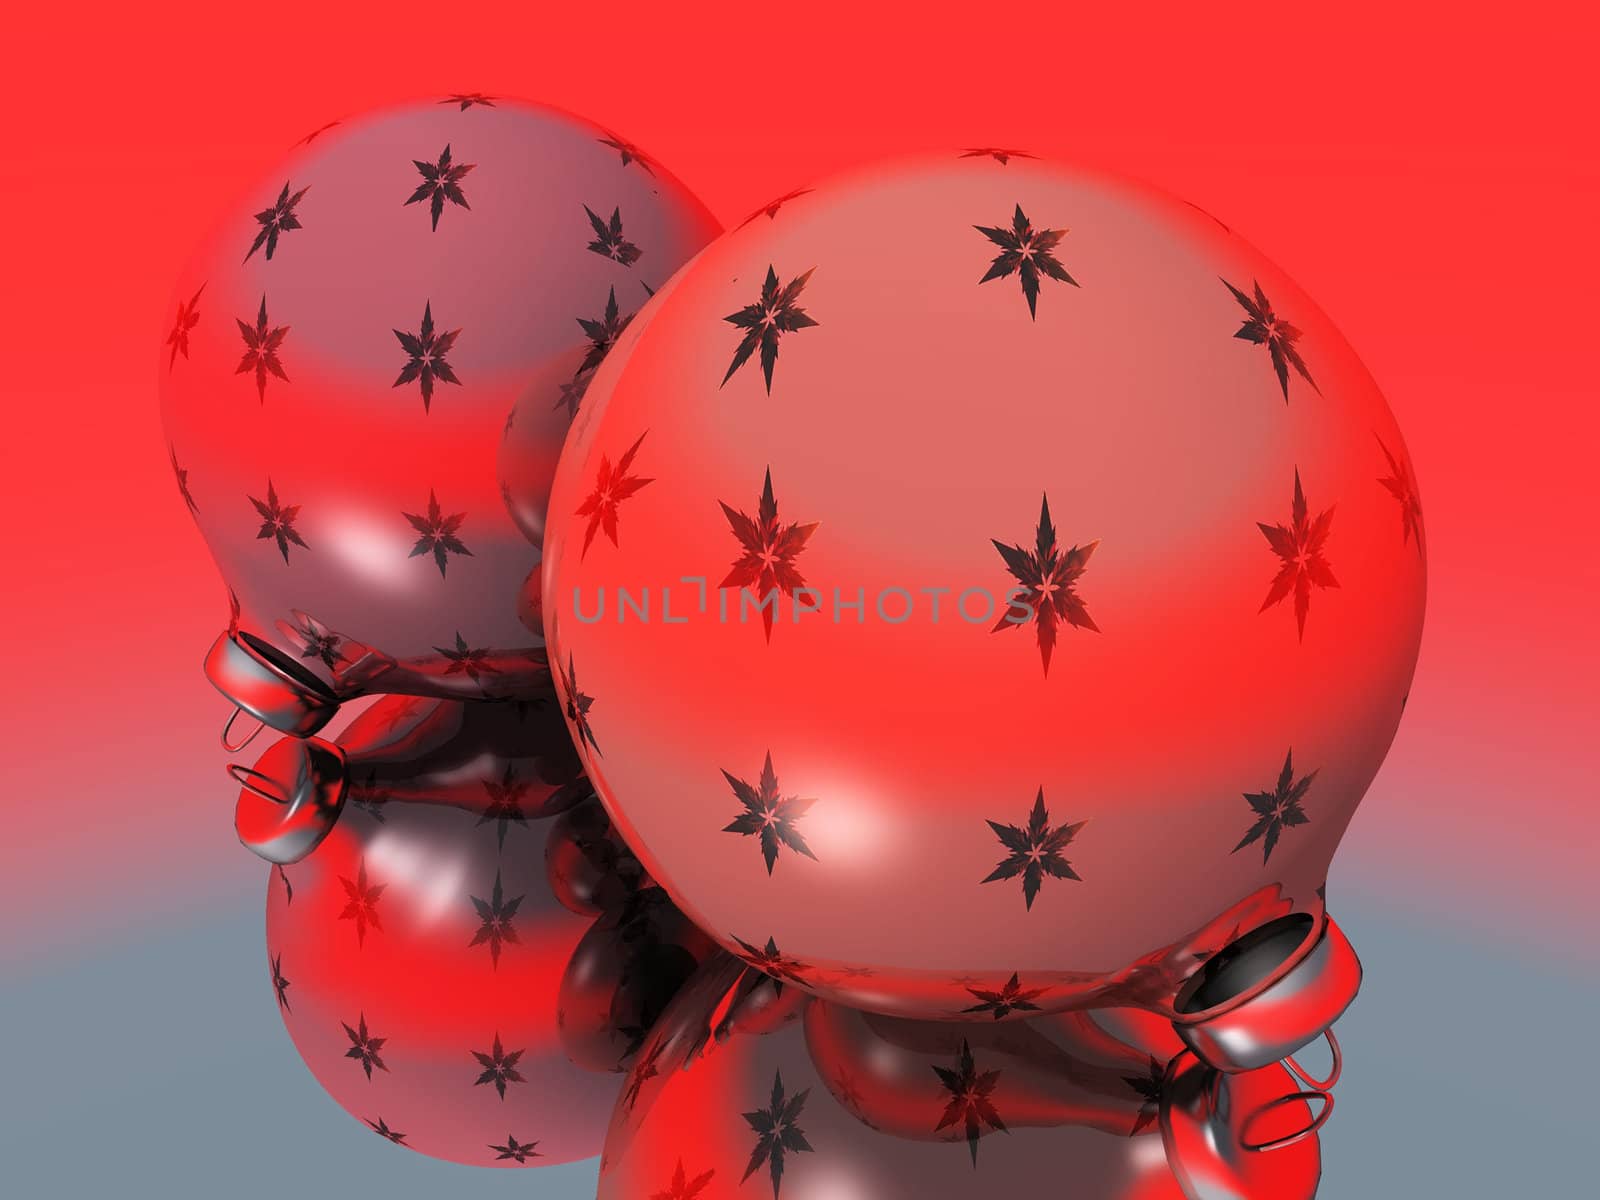 the balls of Christmas and reflections by njaj